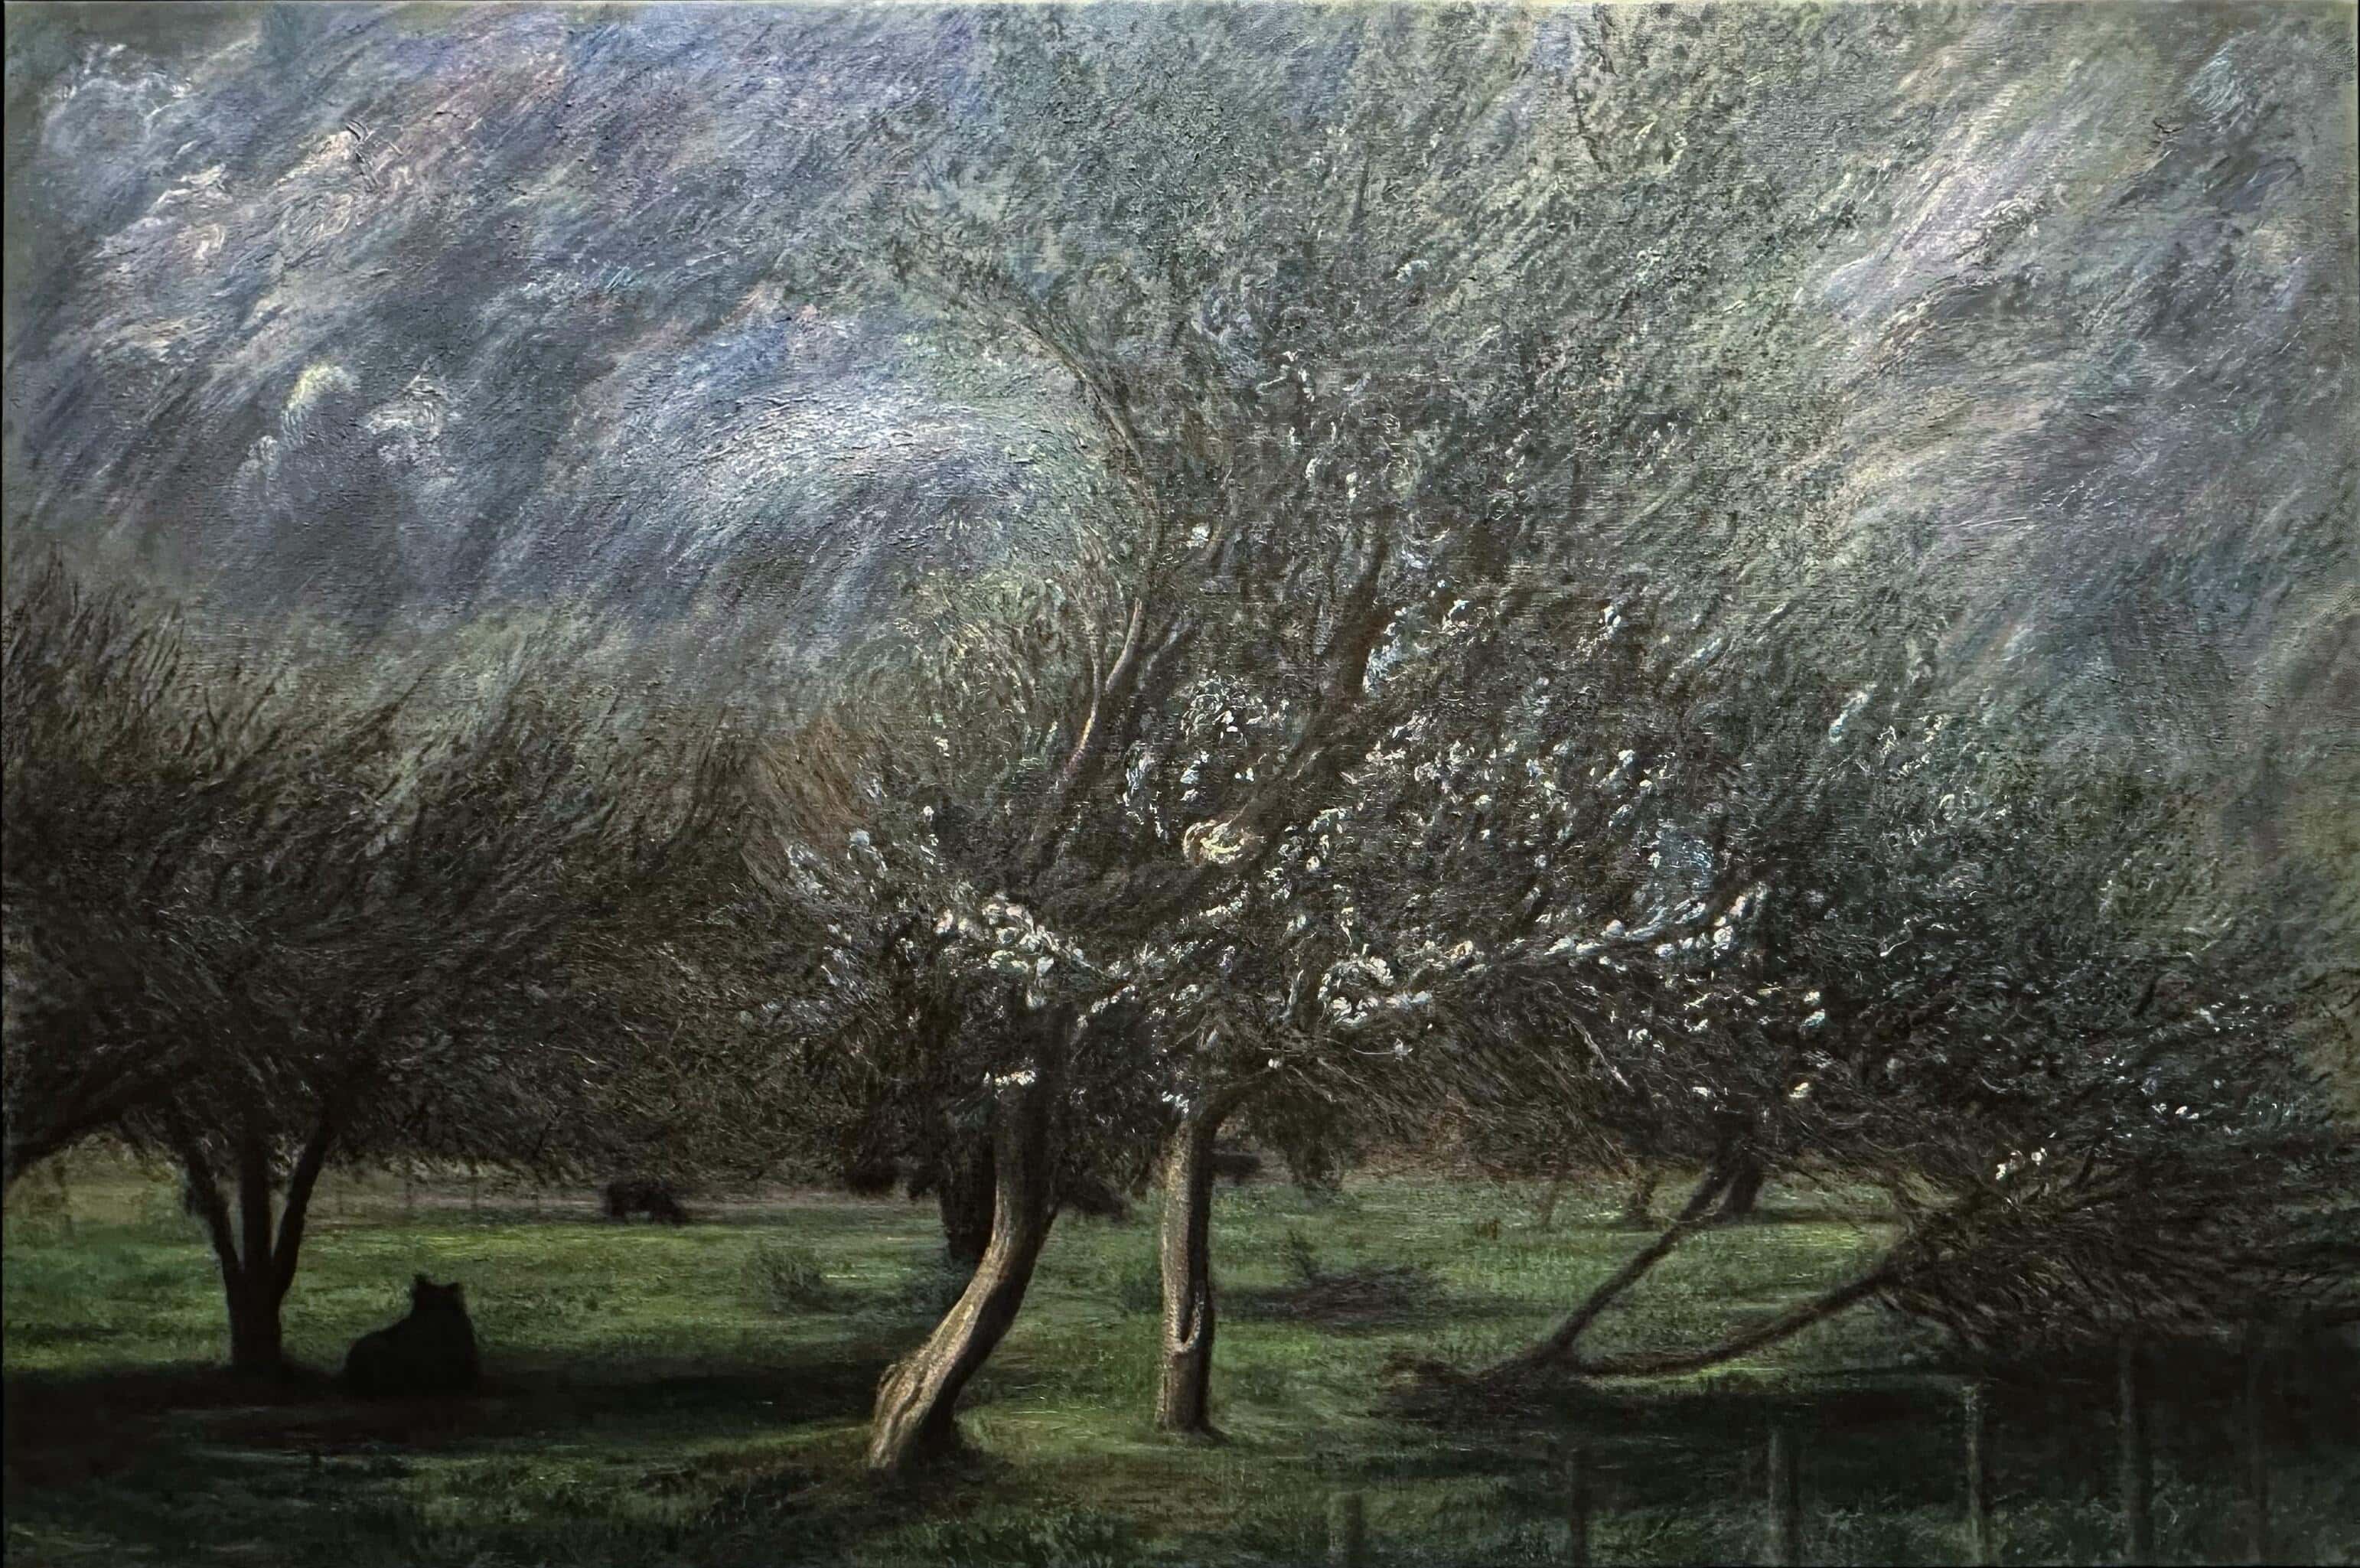 Contemporary art. Title: Dark Silhouettes in an Orchard Grove, Oil on Canvas, 52.5 x 79 in by Canadian artist Paul Chizik.